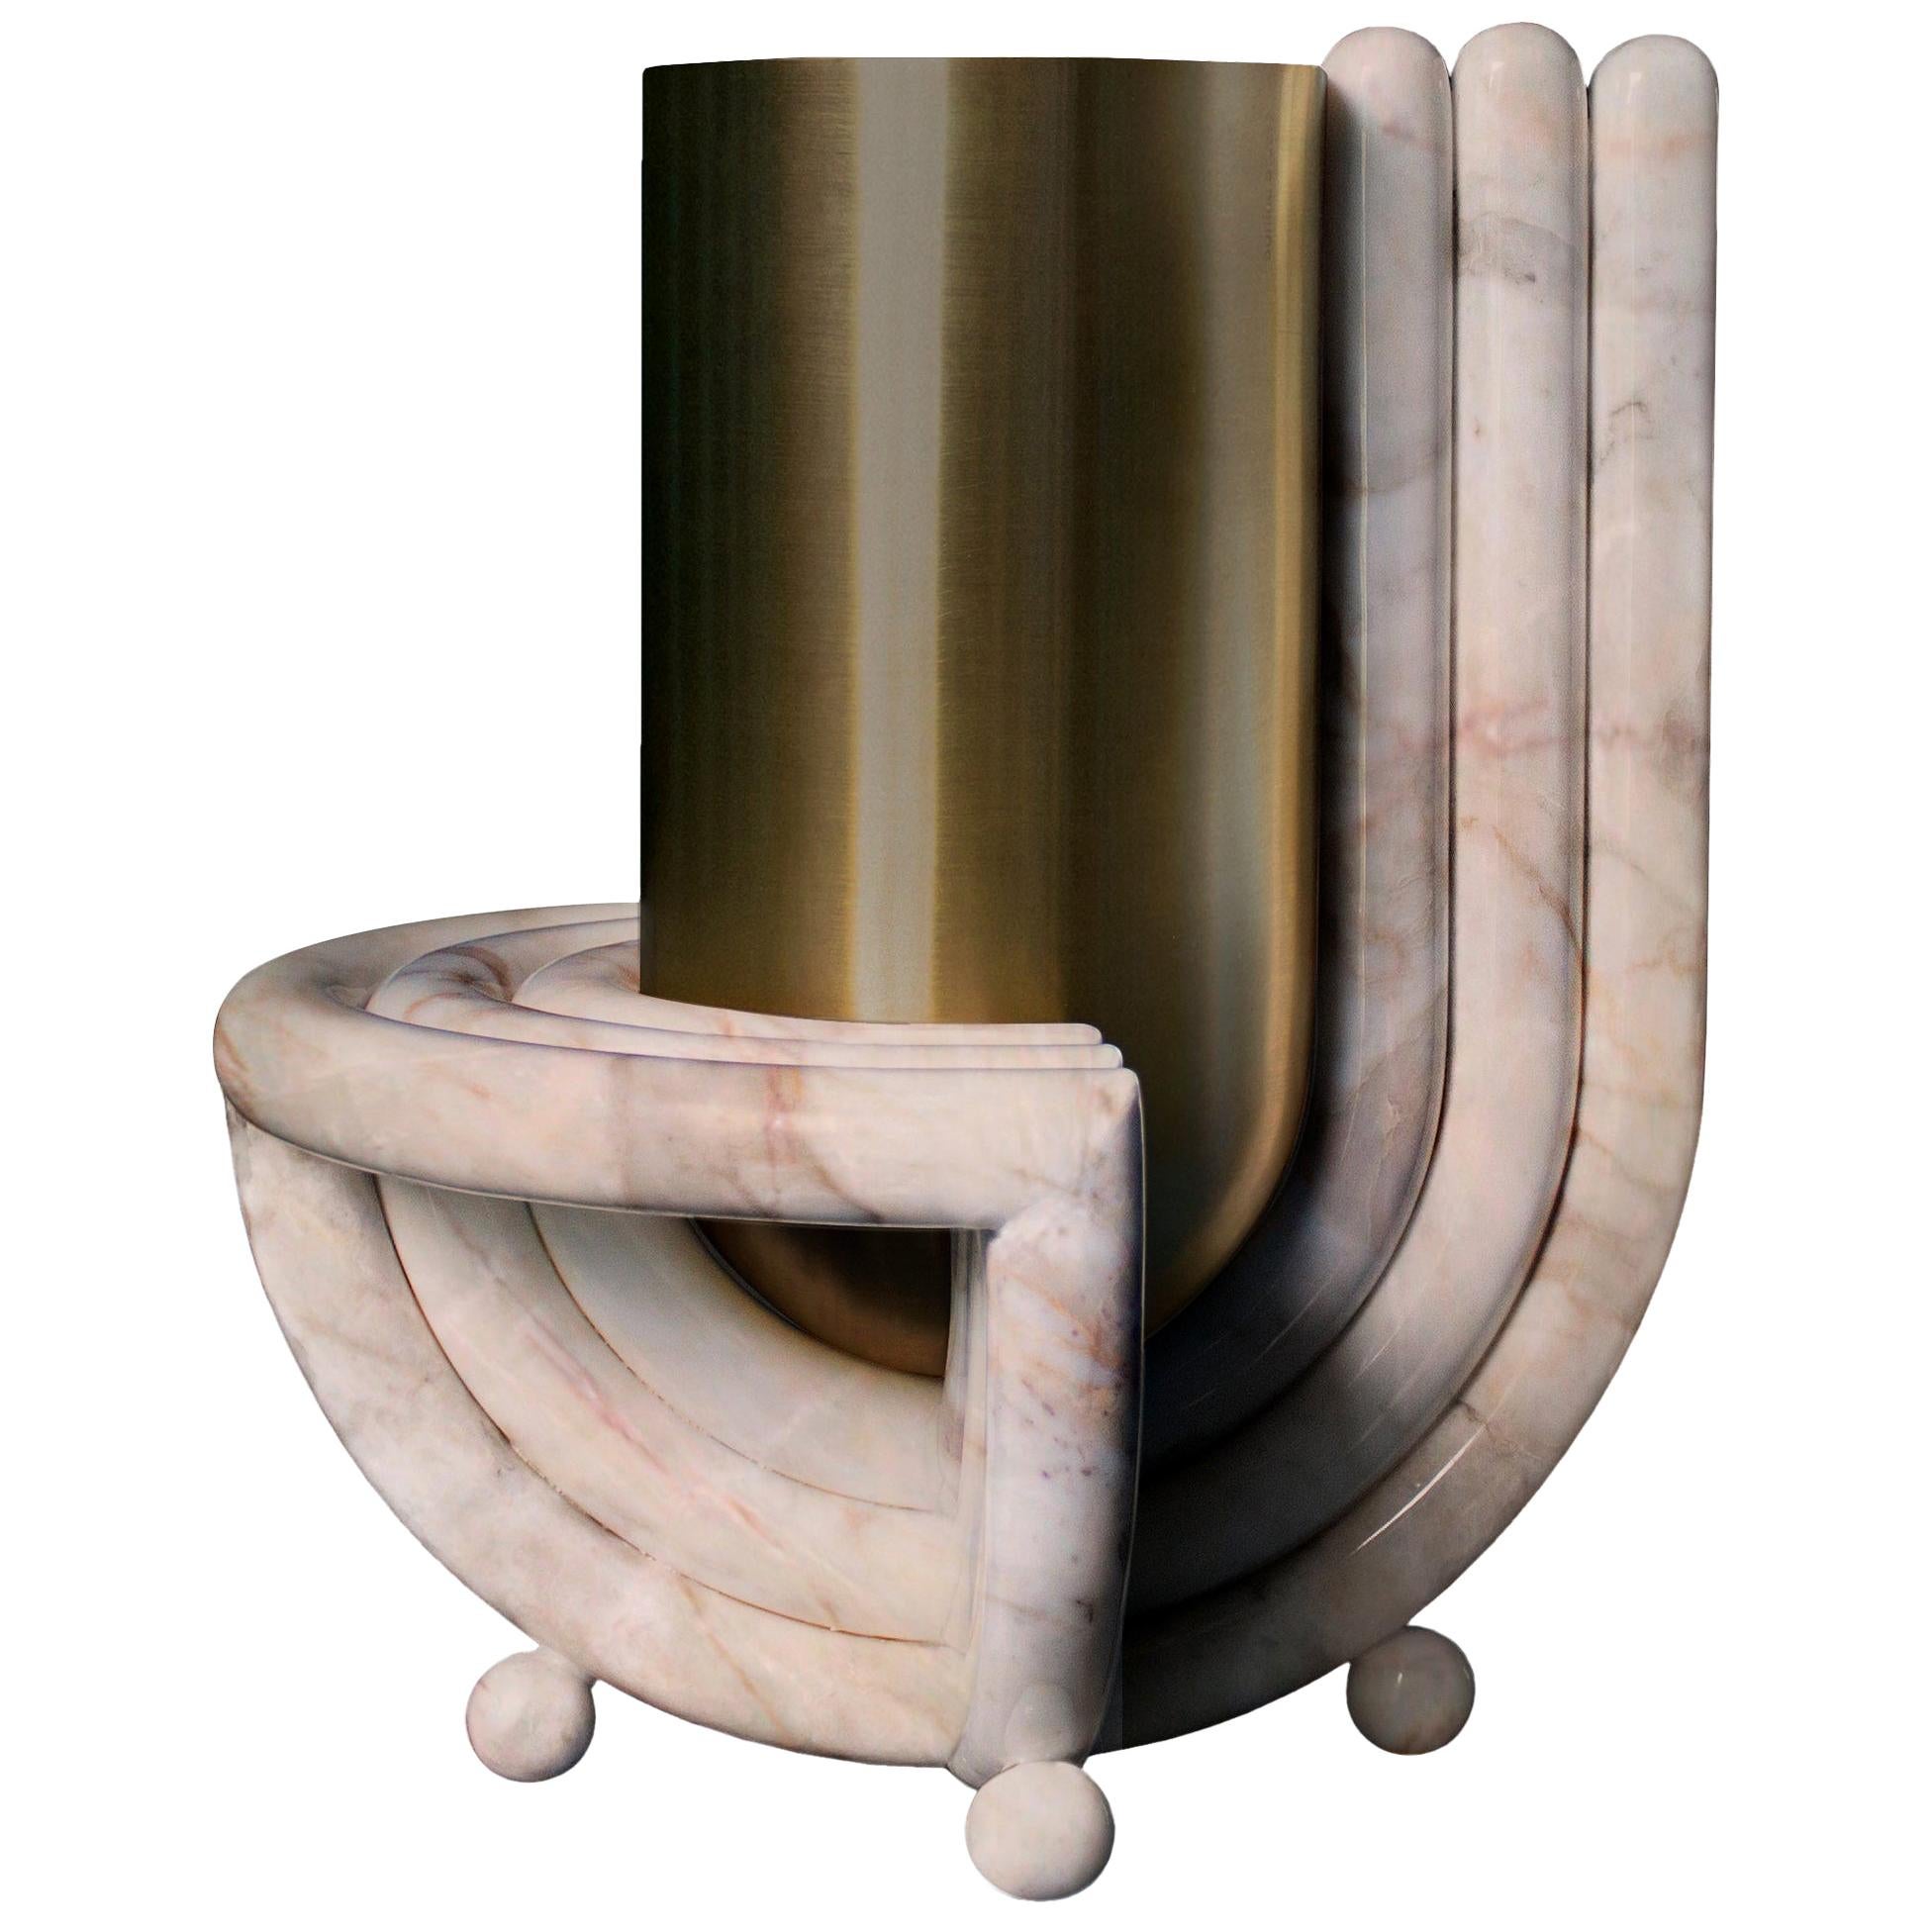 Jupiter Vase, Rosa, Marble and Brushed Brass, by Bohinc Studio For Sale